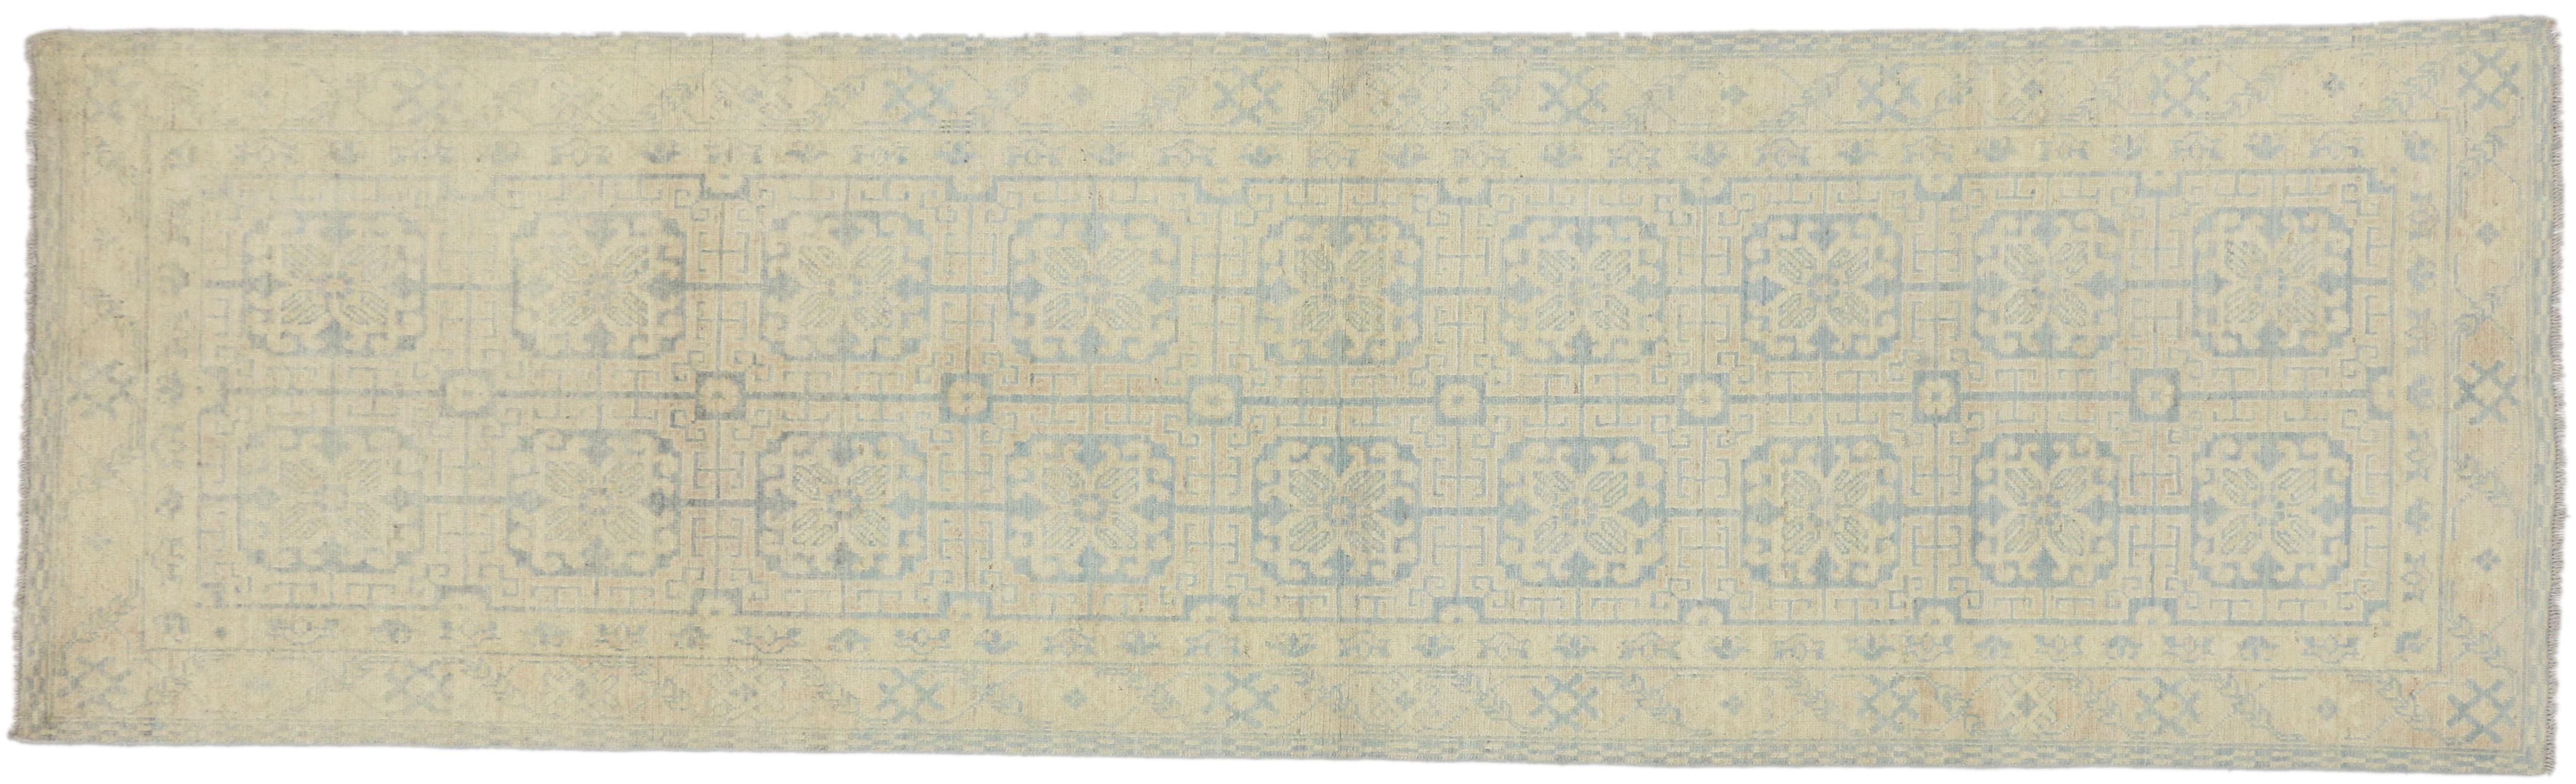 Hand-Knotted French Country Khotan Style Runner, Farmhouse Hallway Runner